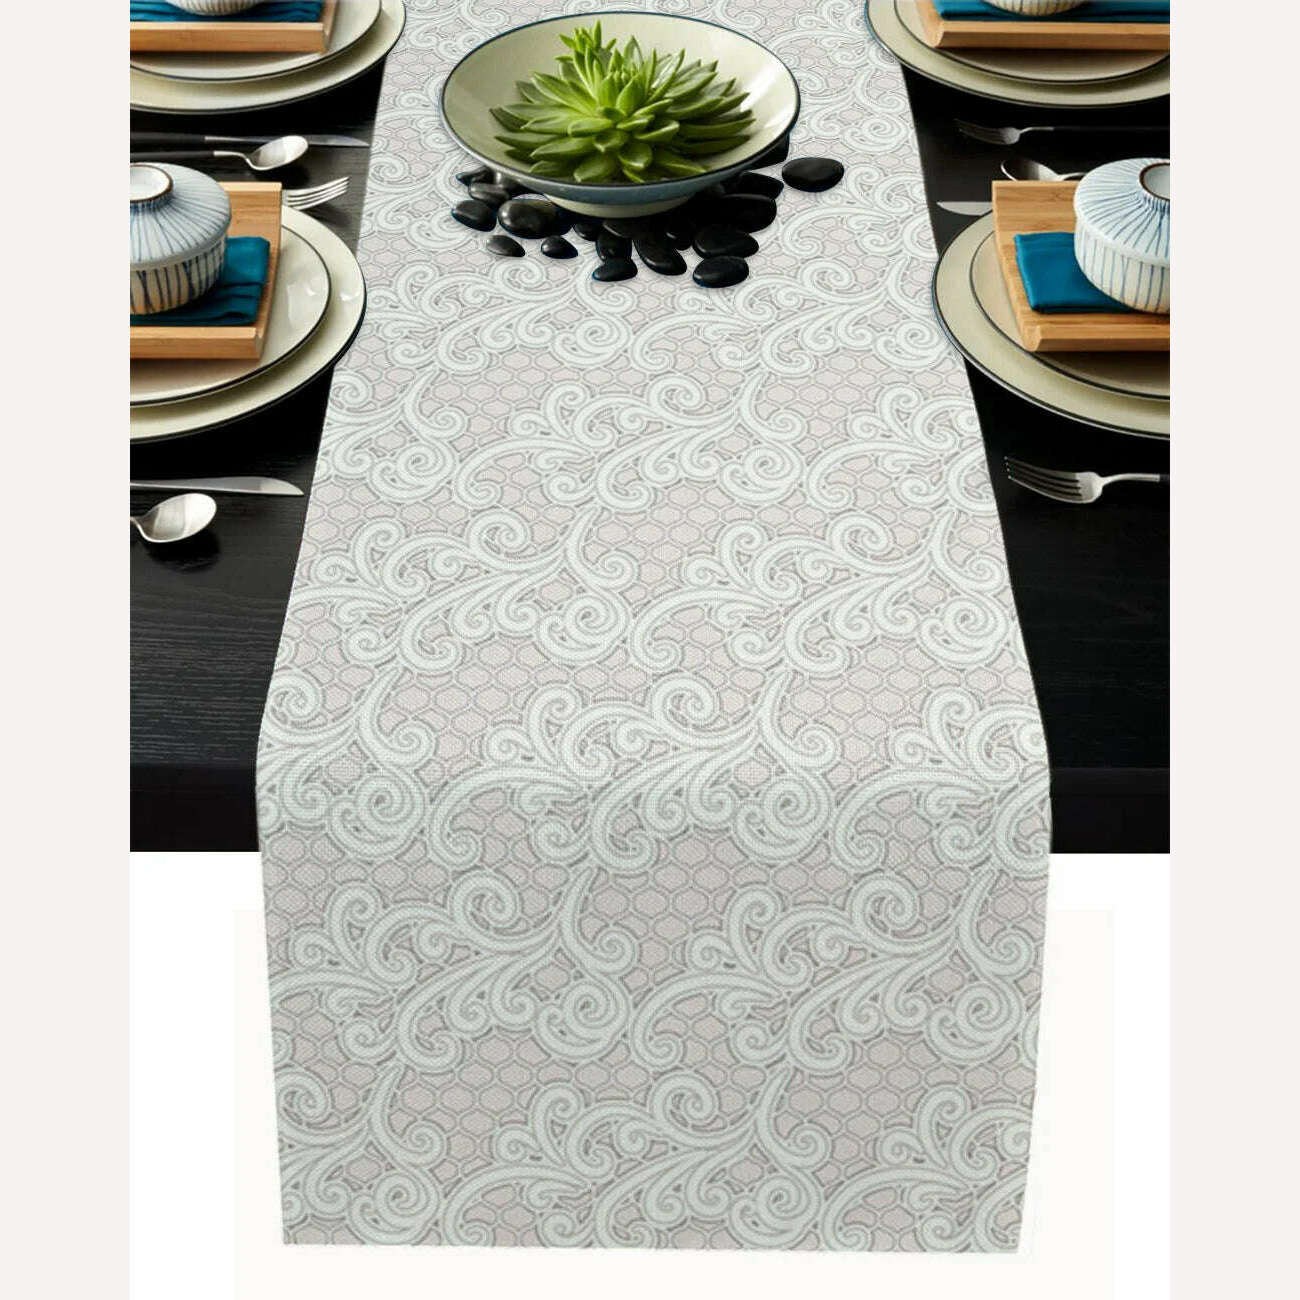 KIMLUD, Linen Burlap Table Runner Colorful Morocco Flowers Islam Arabesque Kitchen Table Runners Dinner Party Wedding Events Decor, LEX09826 / 180x33cm70x13inch, KIMLUD Womens Clothes